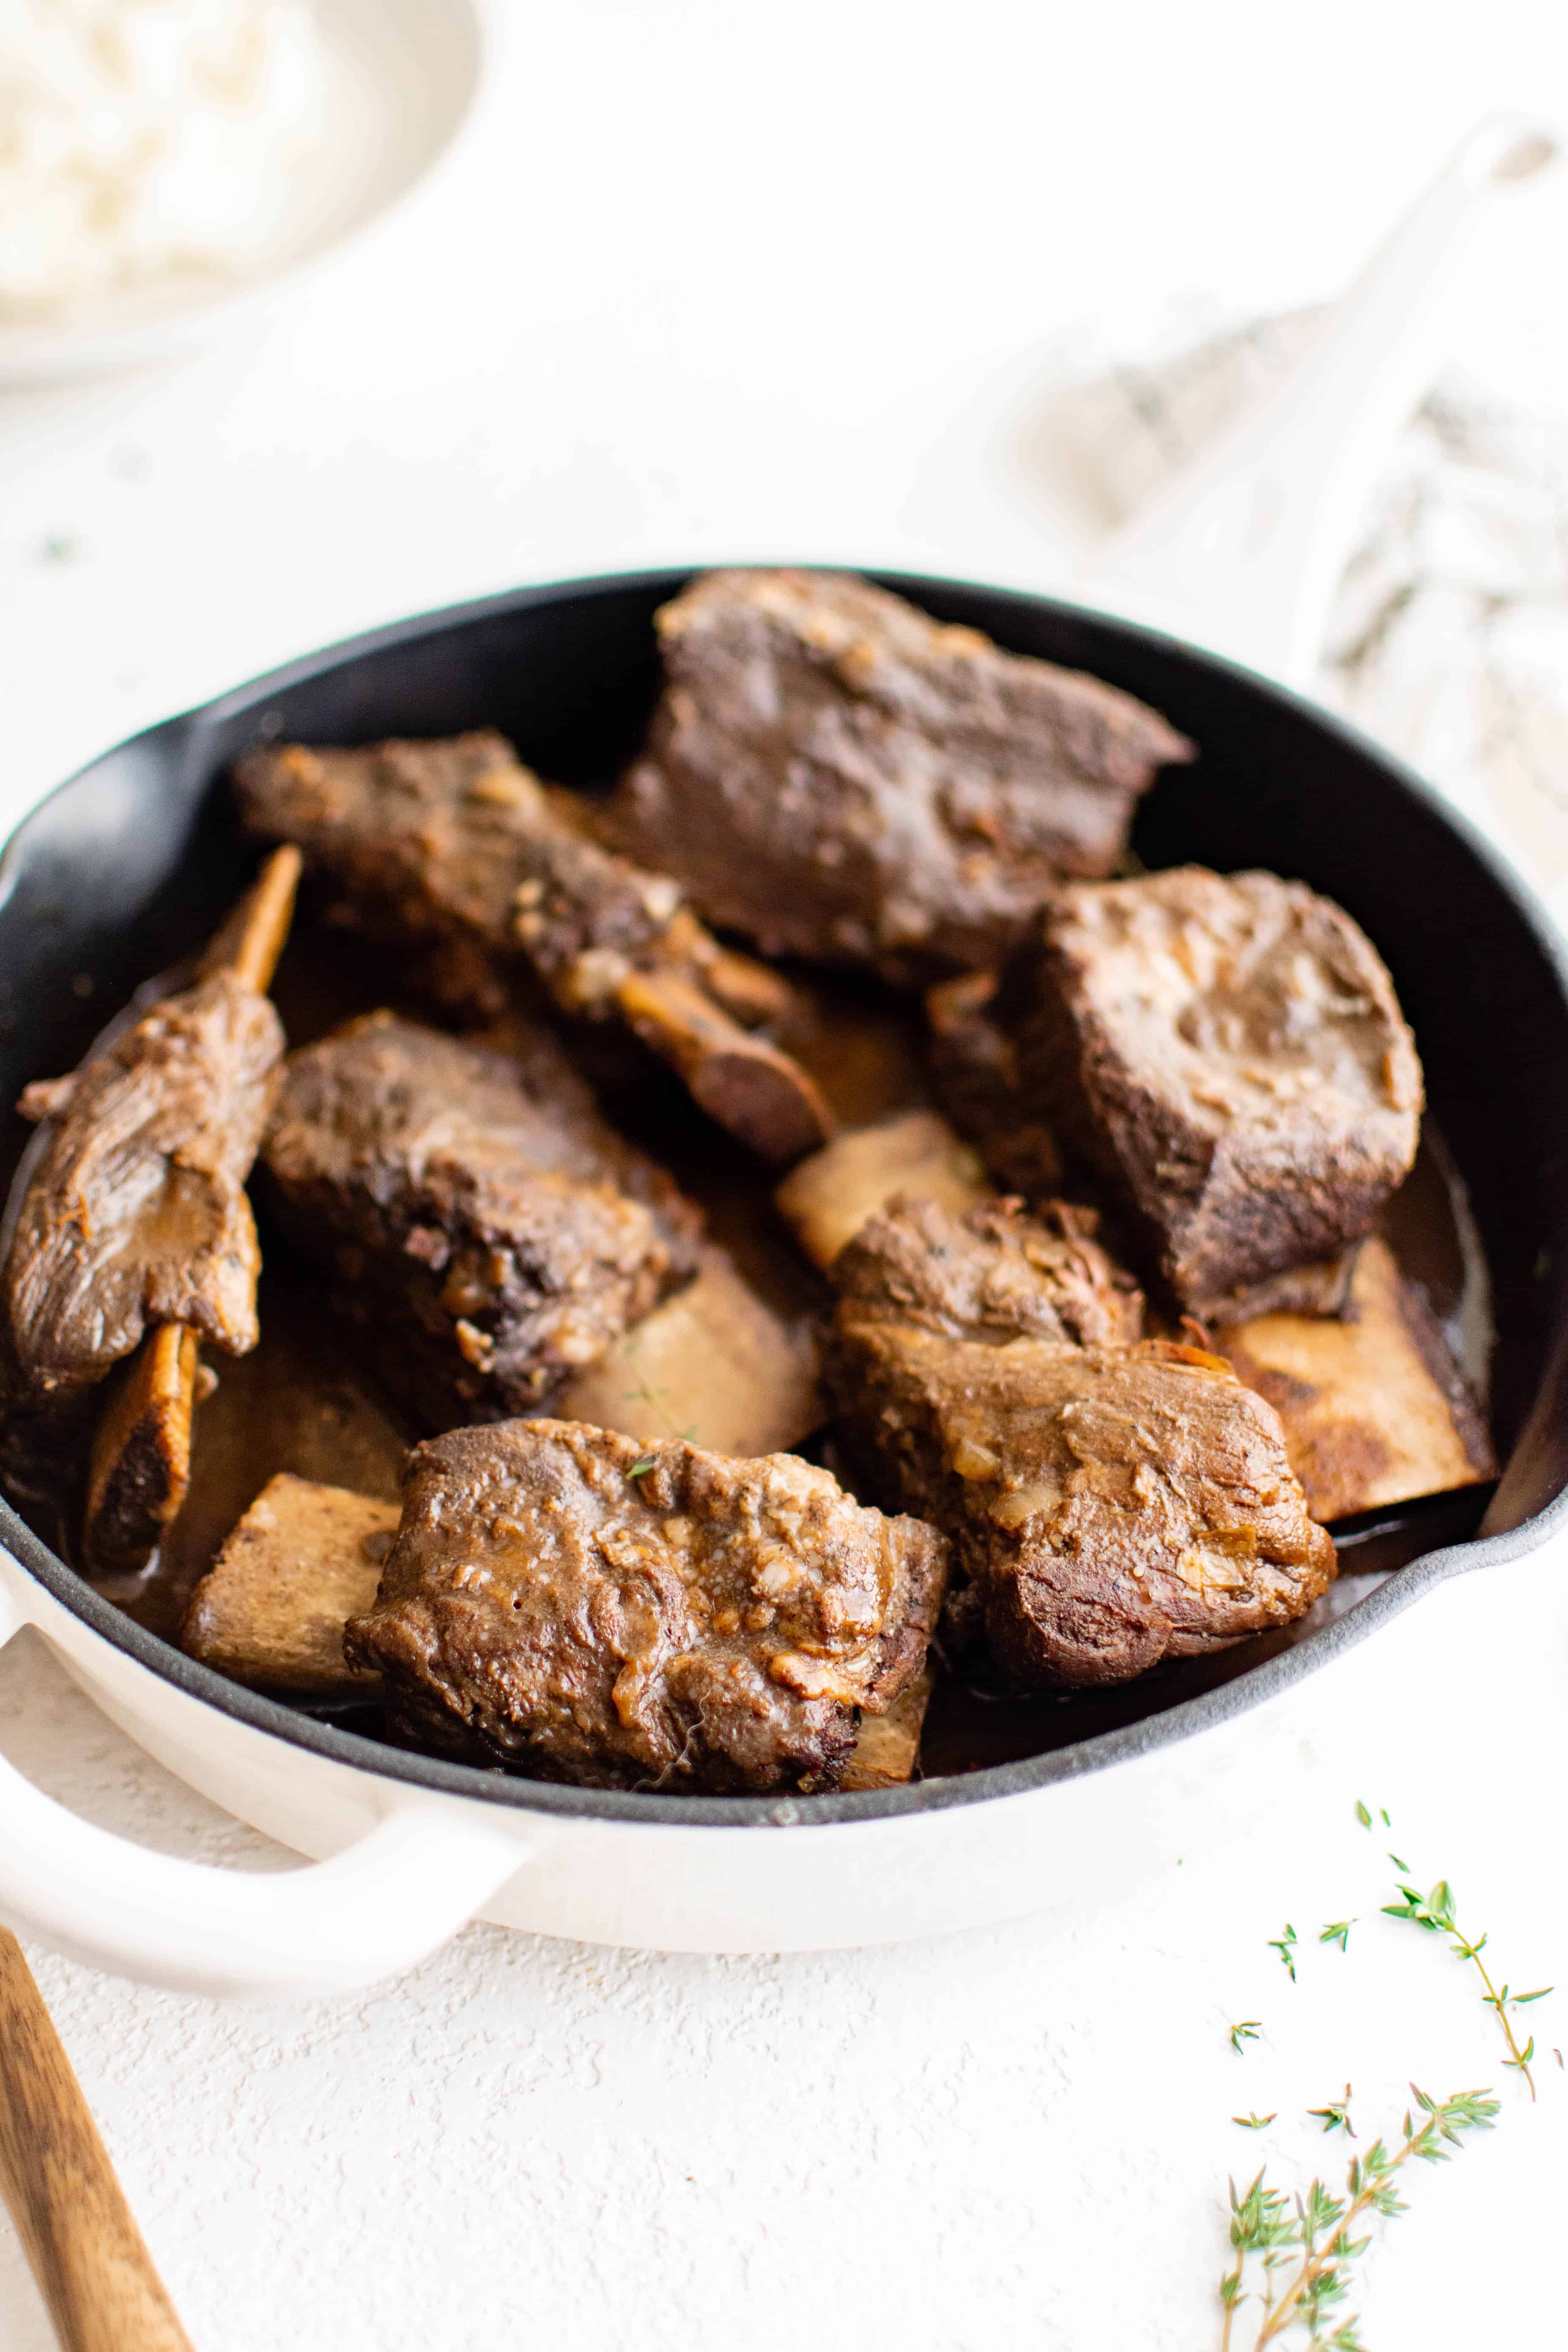 Large white dutch oven filled with tender cooked braised beef short ribs with a red wine beef gravy.